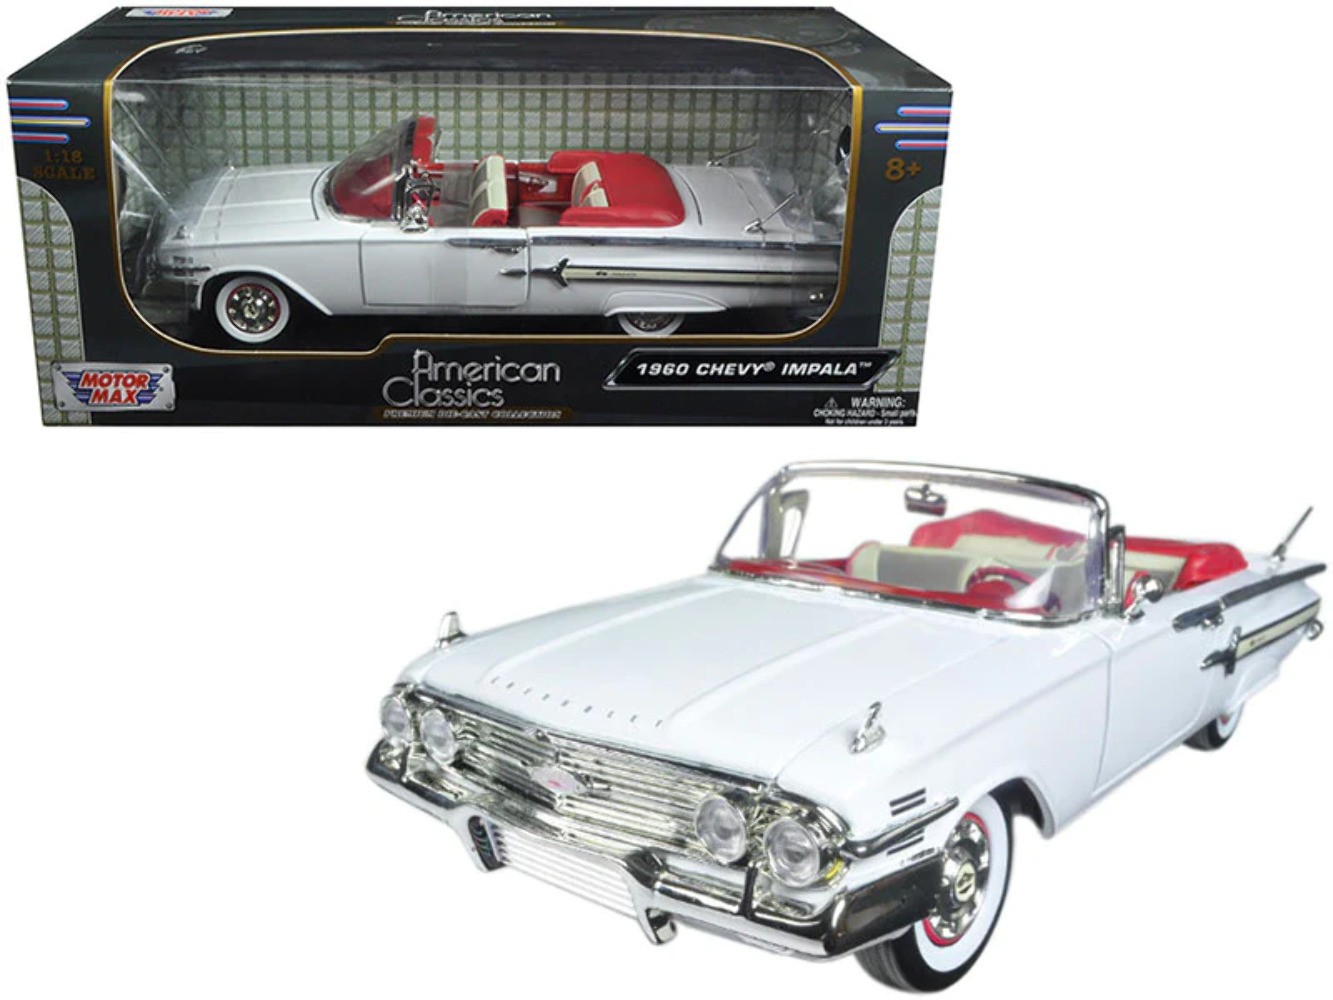 1960 Chevrolet Impala Convertible White with Red Interior 1/18 Diecast Model Car